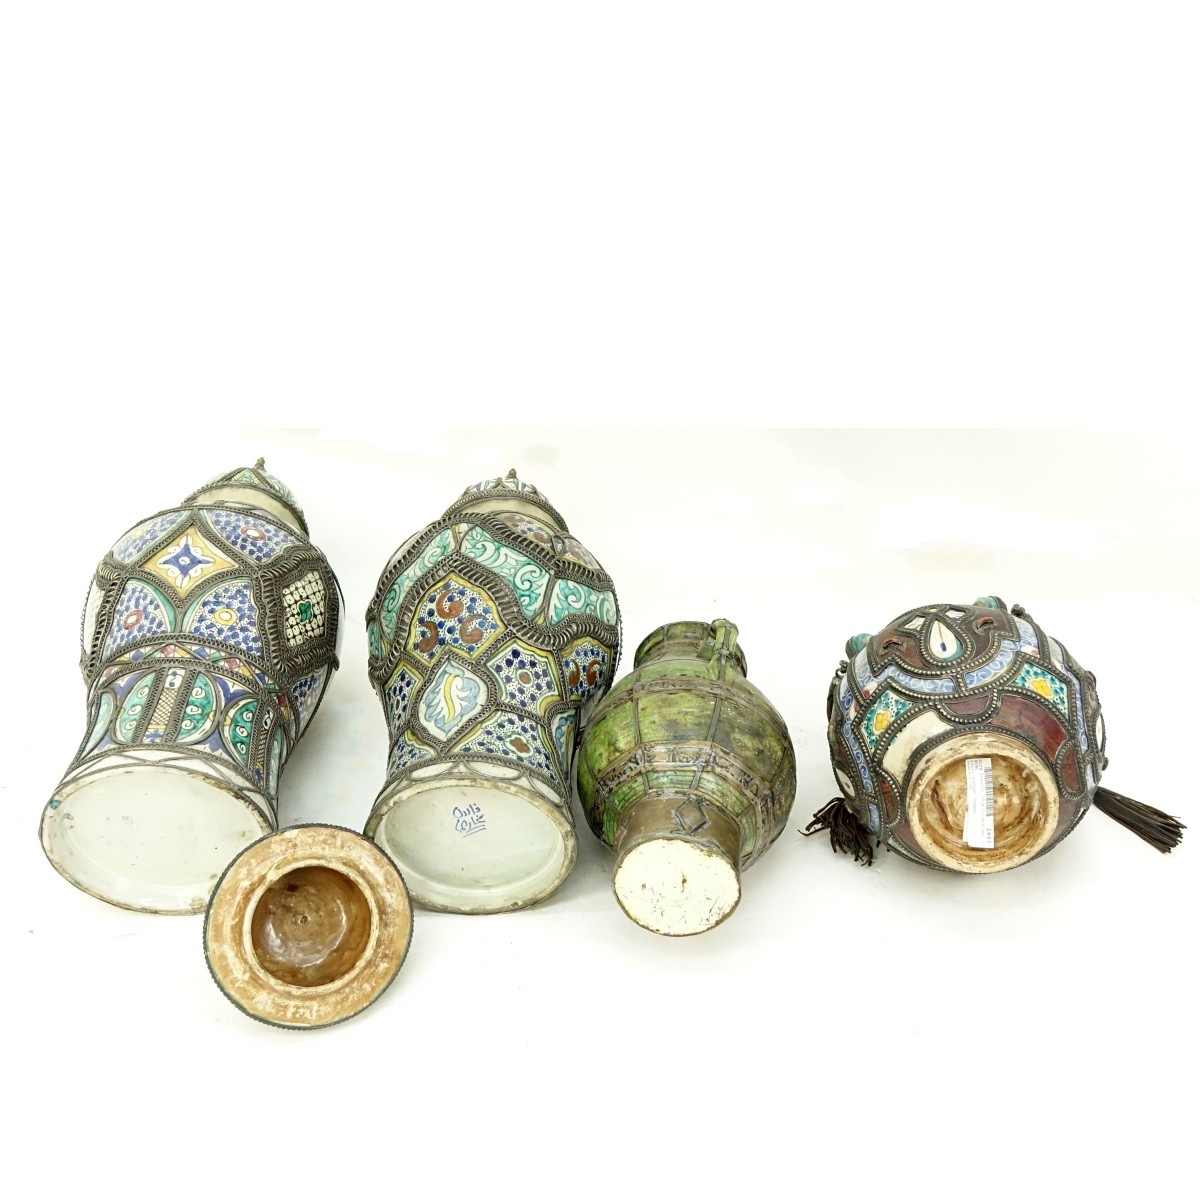 Grouping of Four (4) Moroccan Pottery Jars